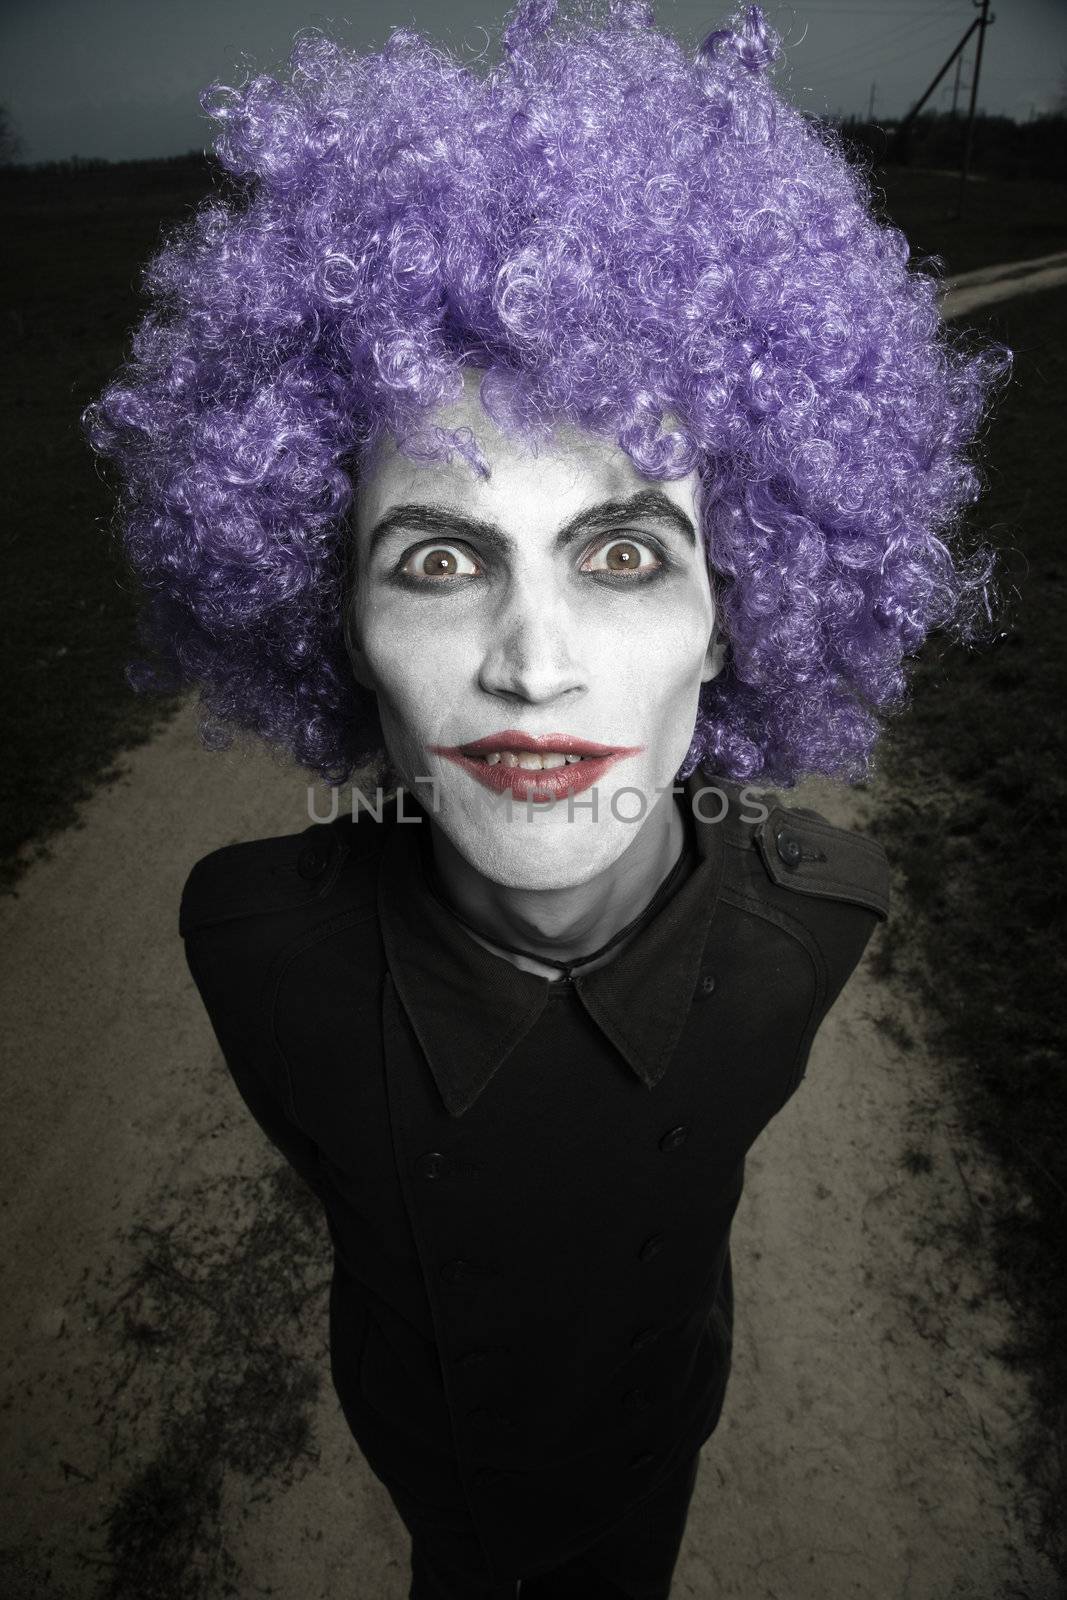 Crazy man outdoors with wig and clown makeup. Artistic darkness and colors added